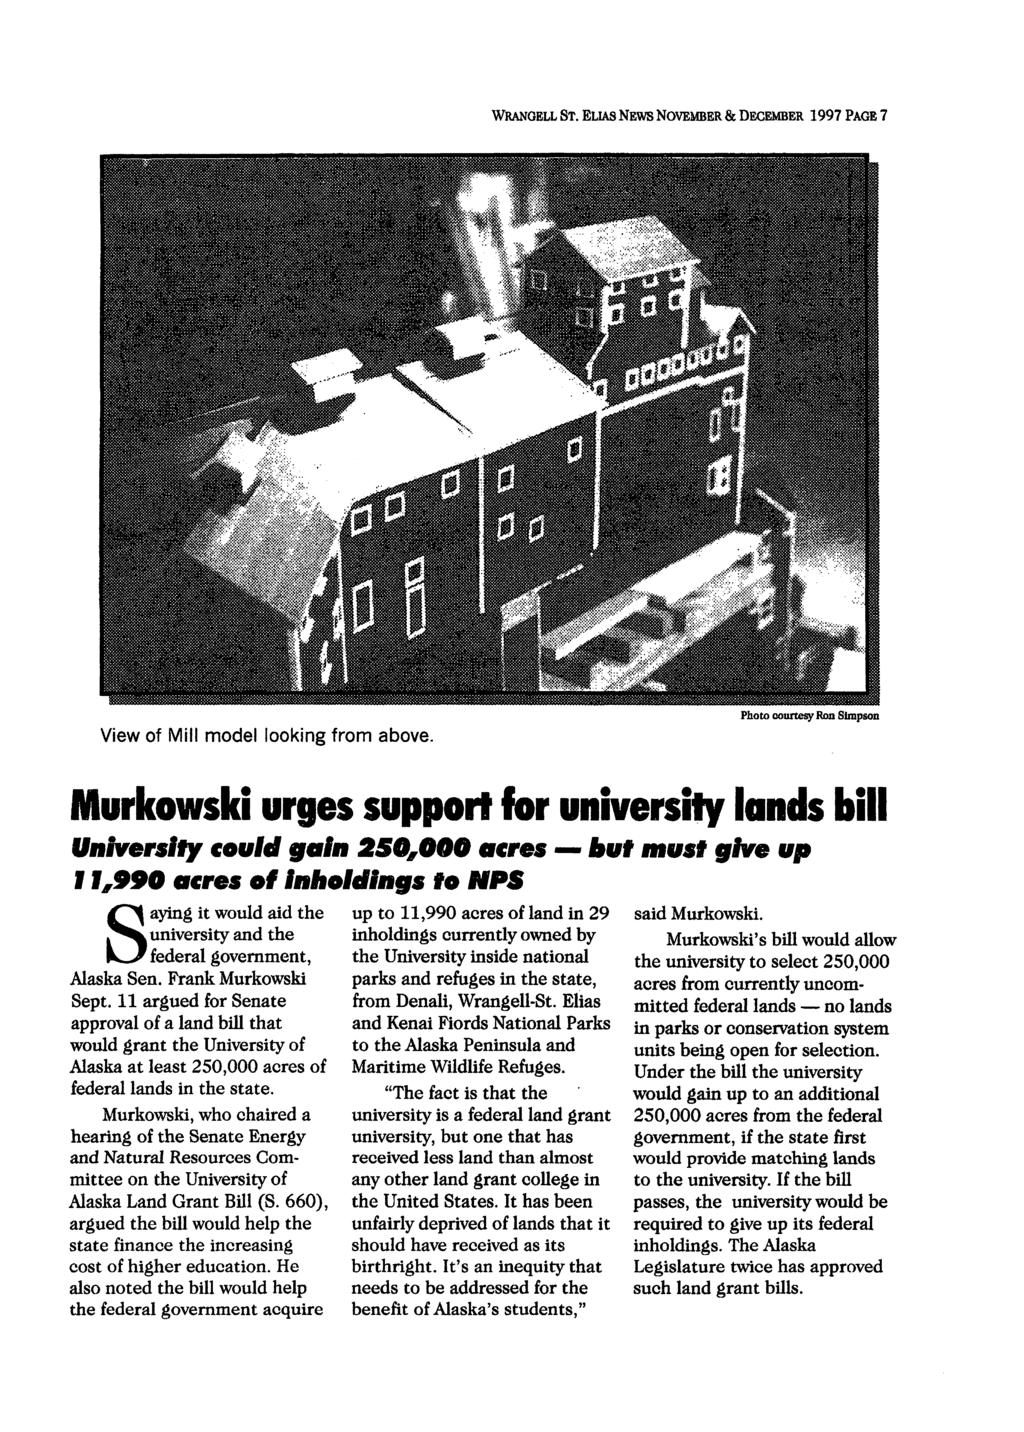 WRANGELL ST. ELIAS NEWS NOVEMBER & DECEMBER 1997 PAGE 7 View of Mill model looking from above.